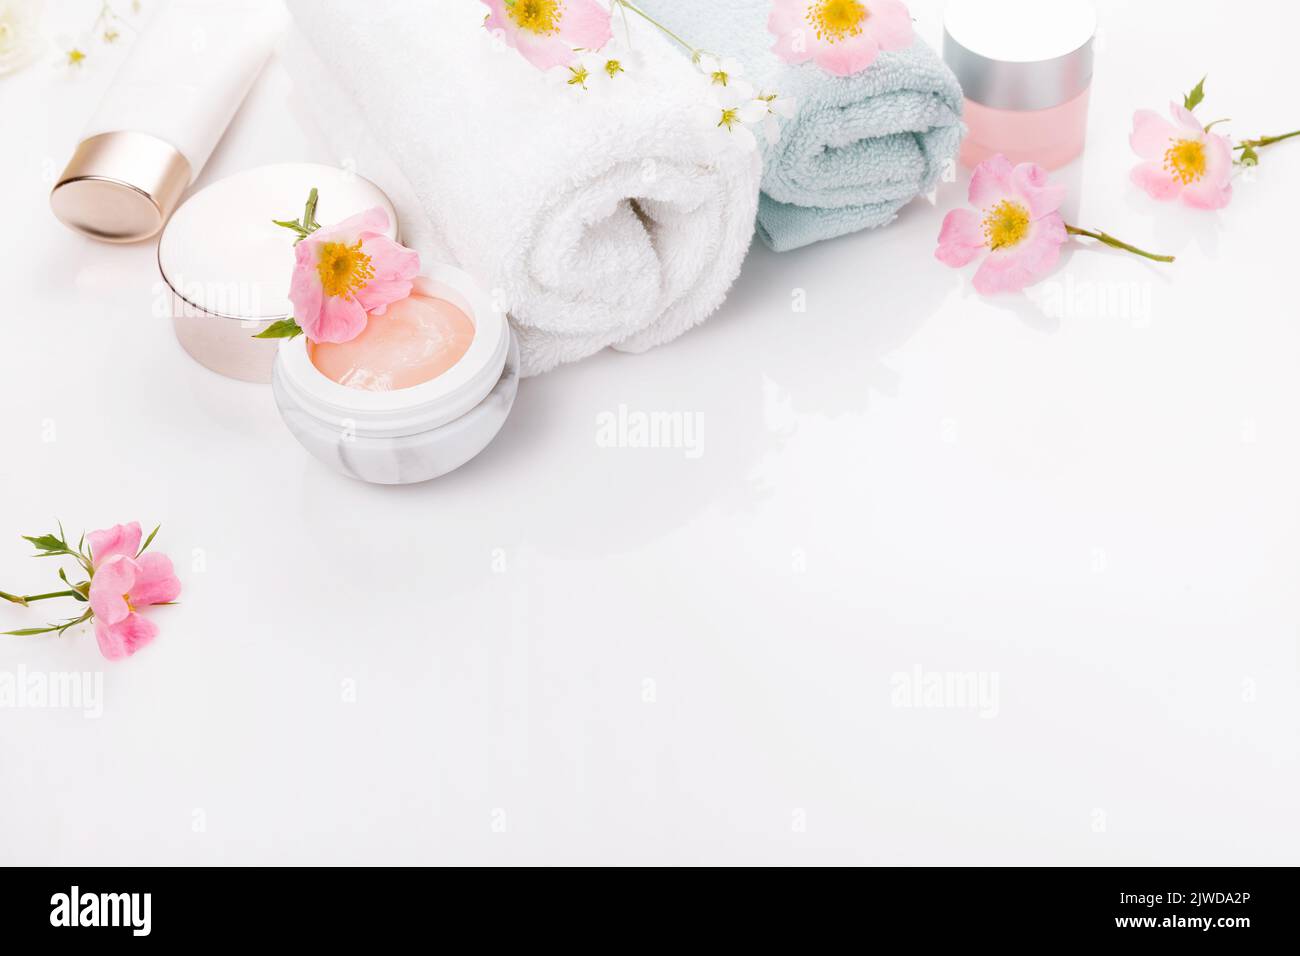 Beauty and spa concept. Towel and skin care cosmetics with rose hips on a white background. Flat lay. Stock Photo